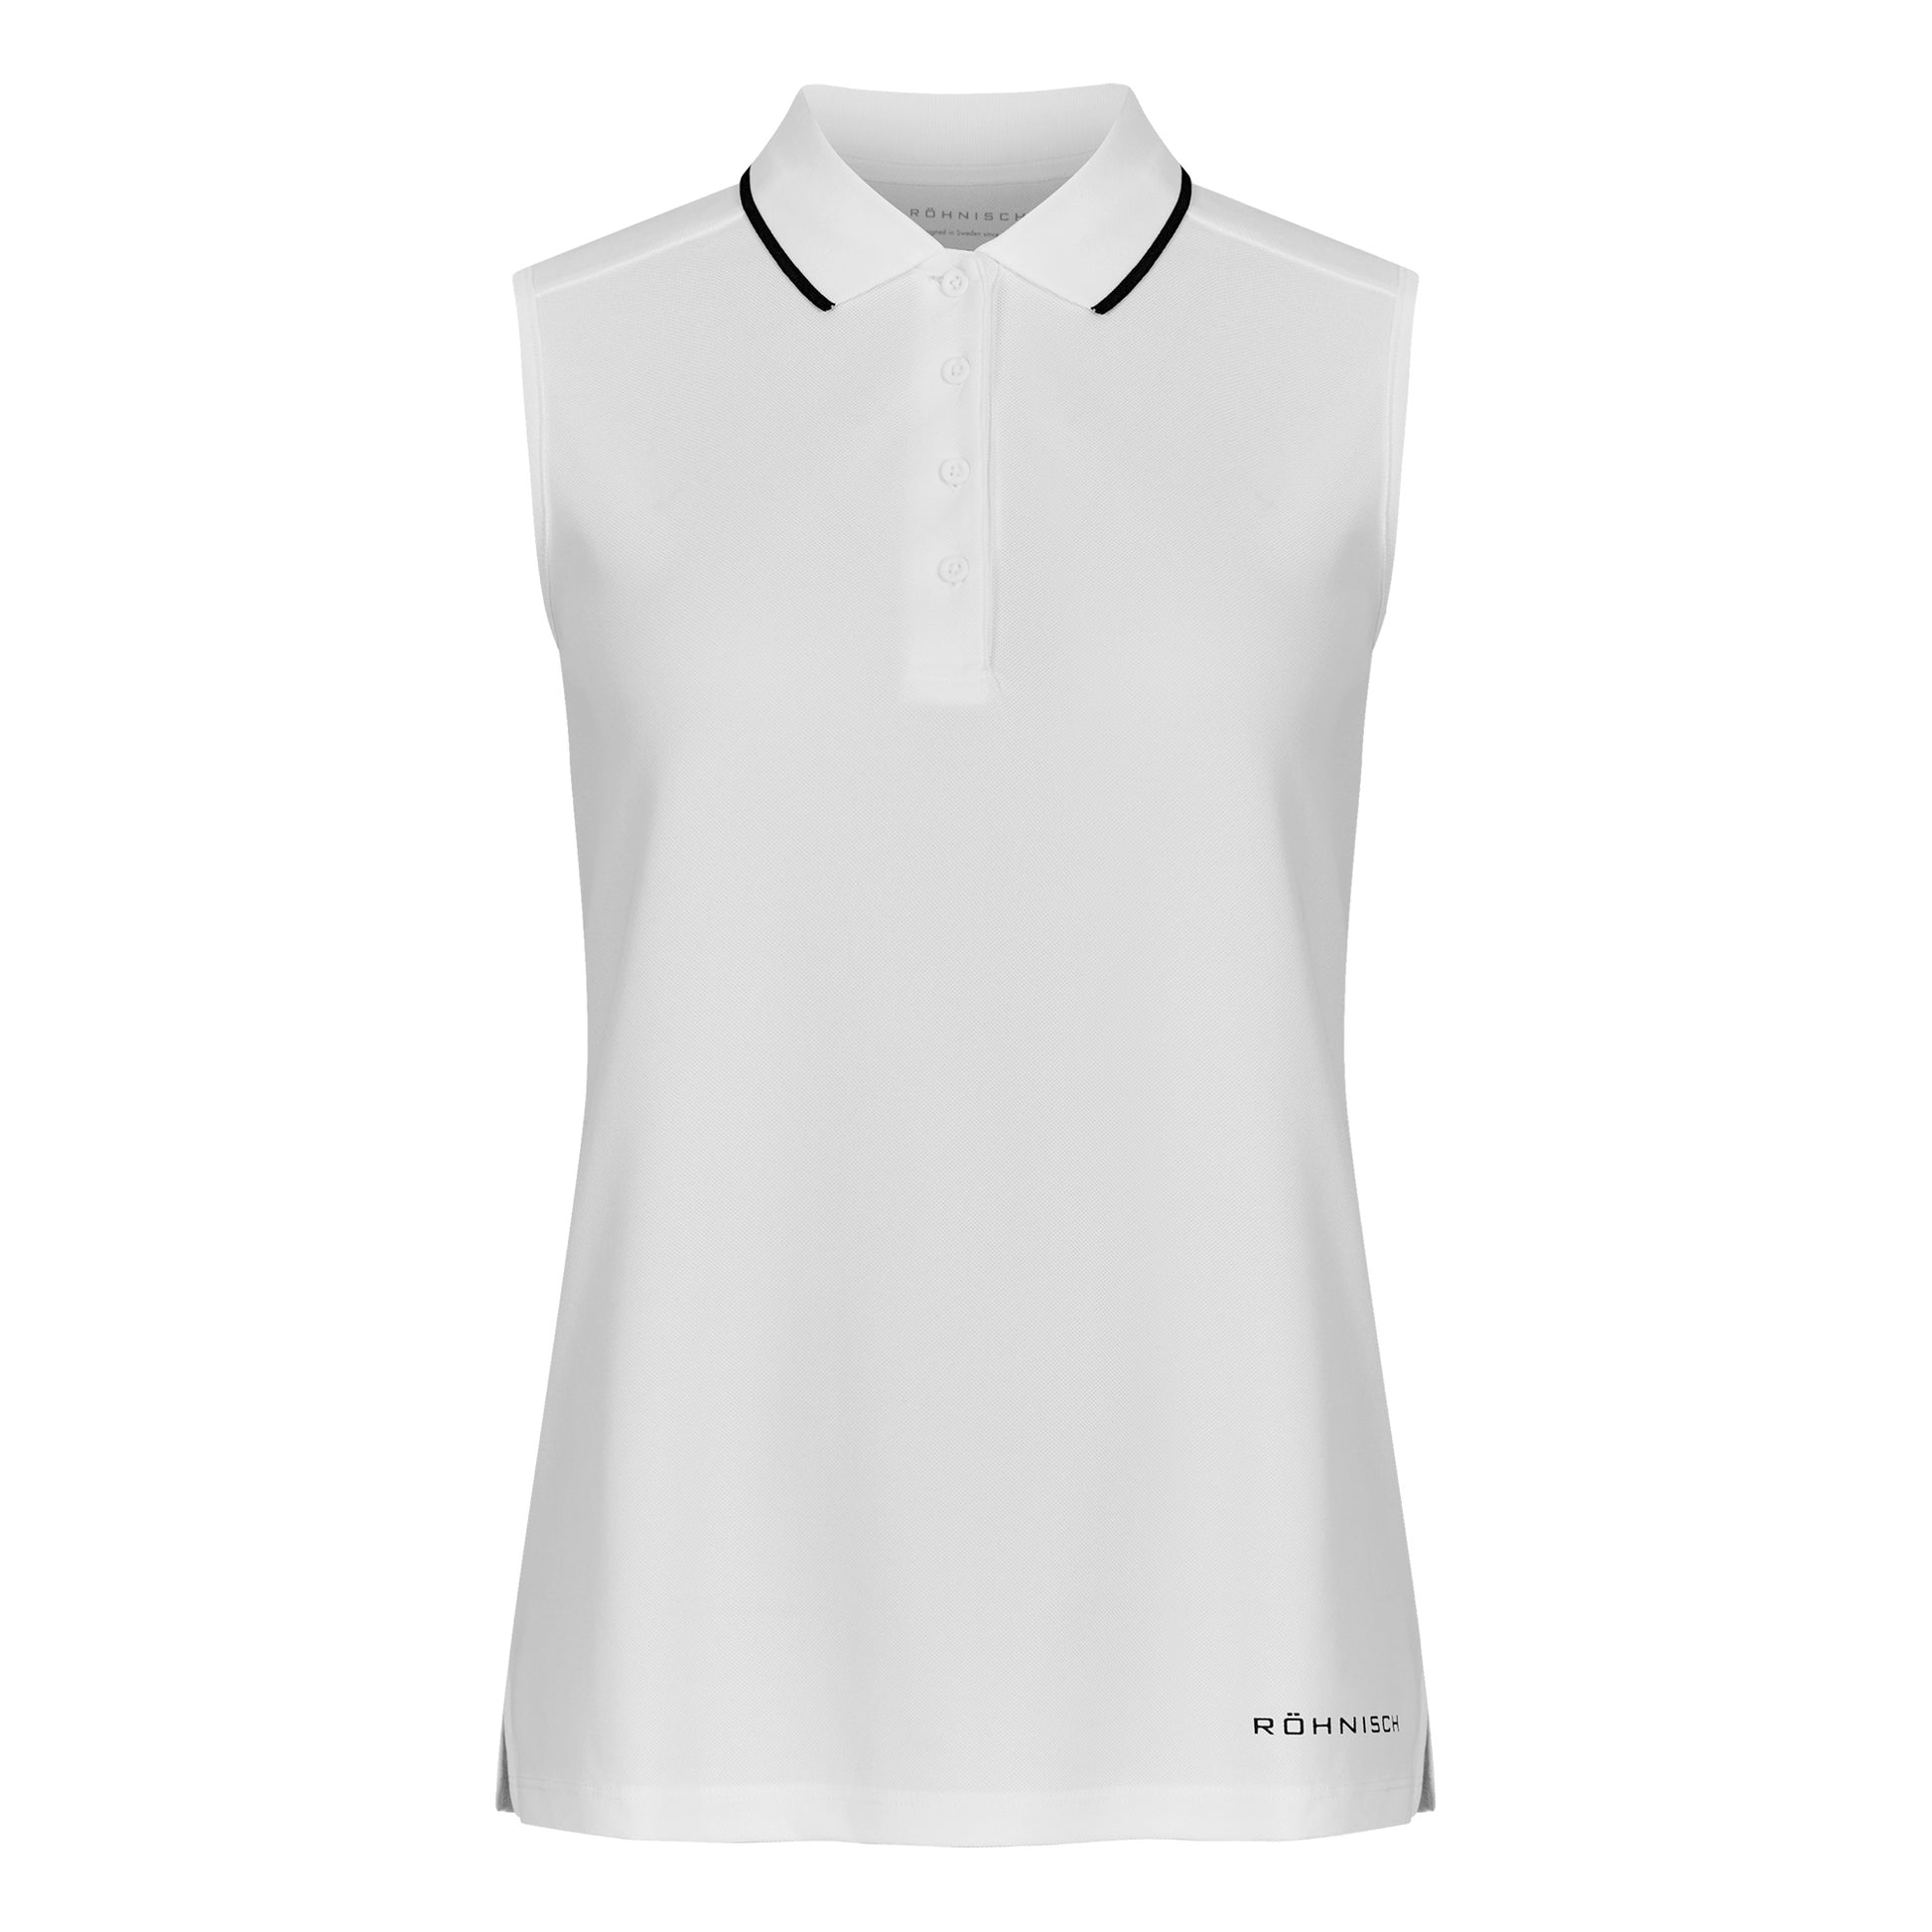 Rohnisch Ladies Classic Sleeveless Polo with Contrast Trim in White